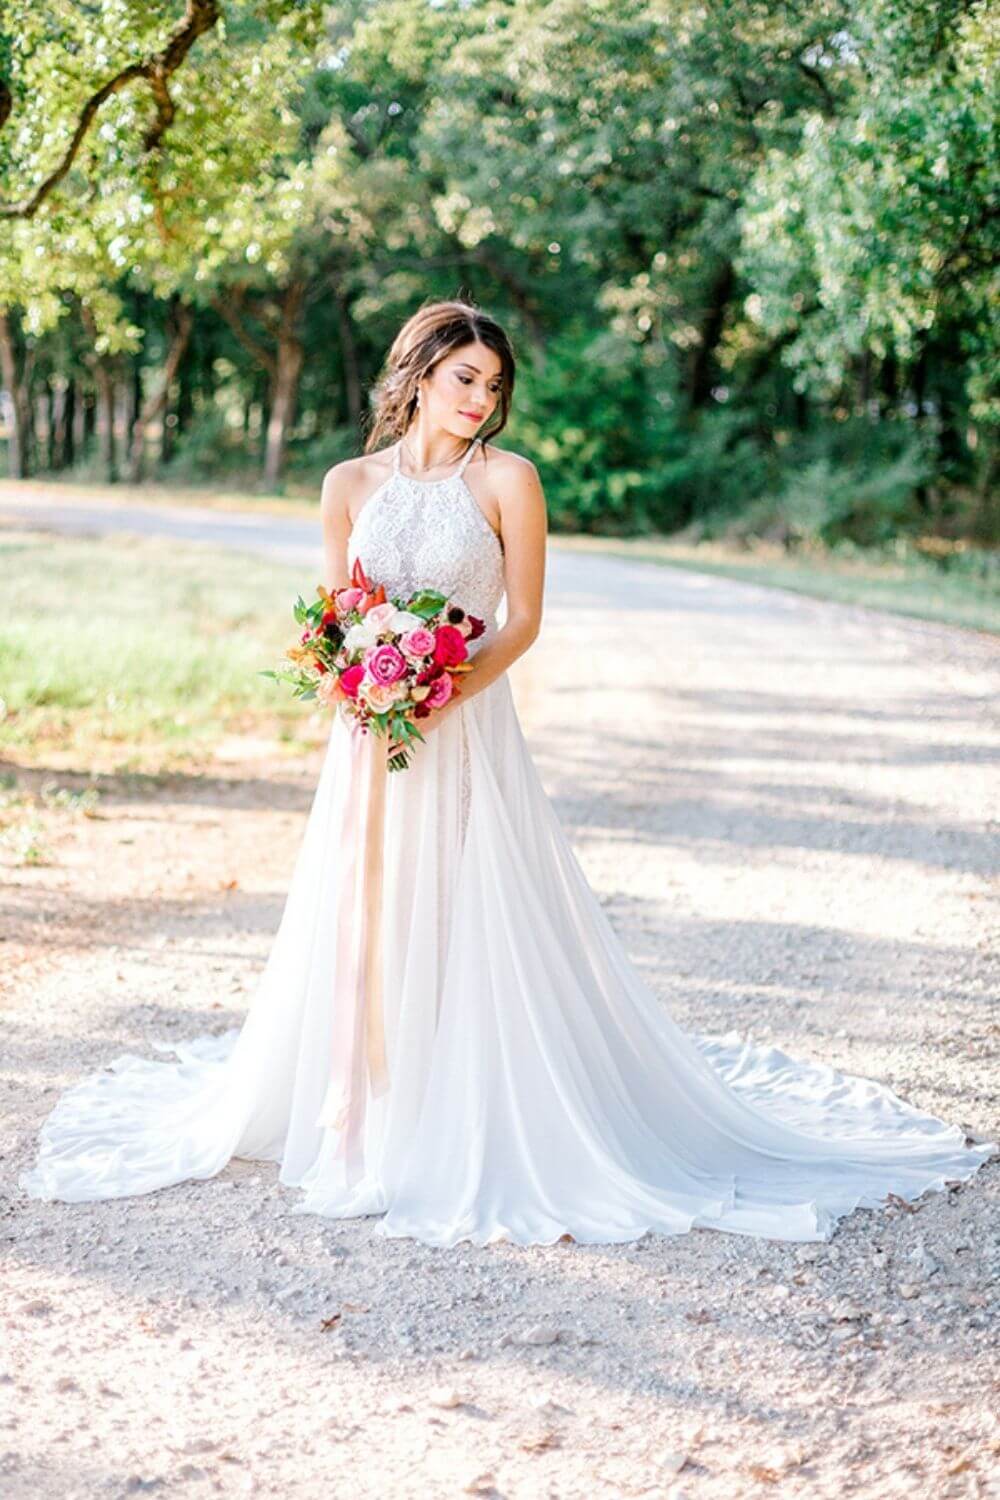 Bride holding pink bouquet in an A-line Wedding Dress photo by Elizabeth Couch Photography